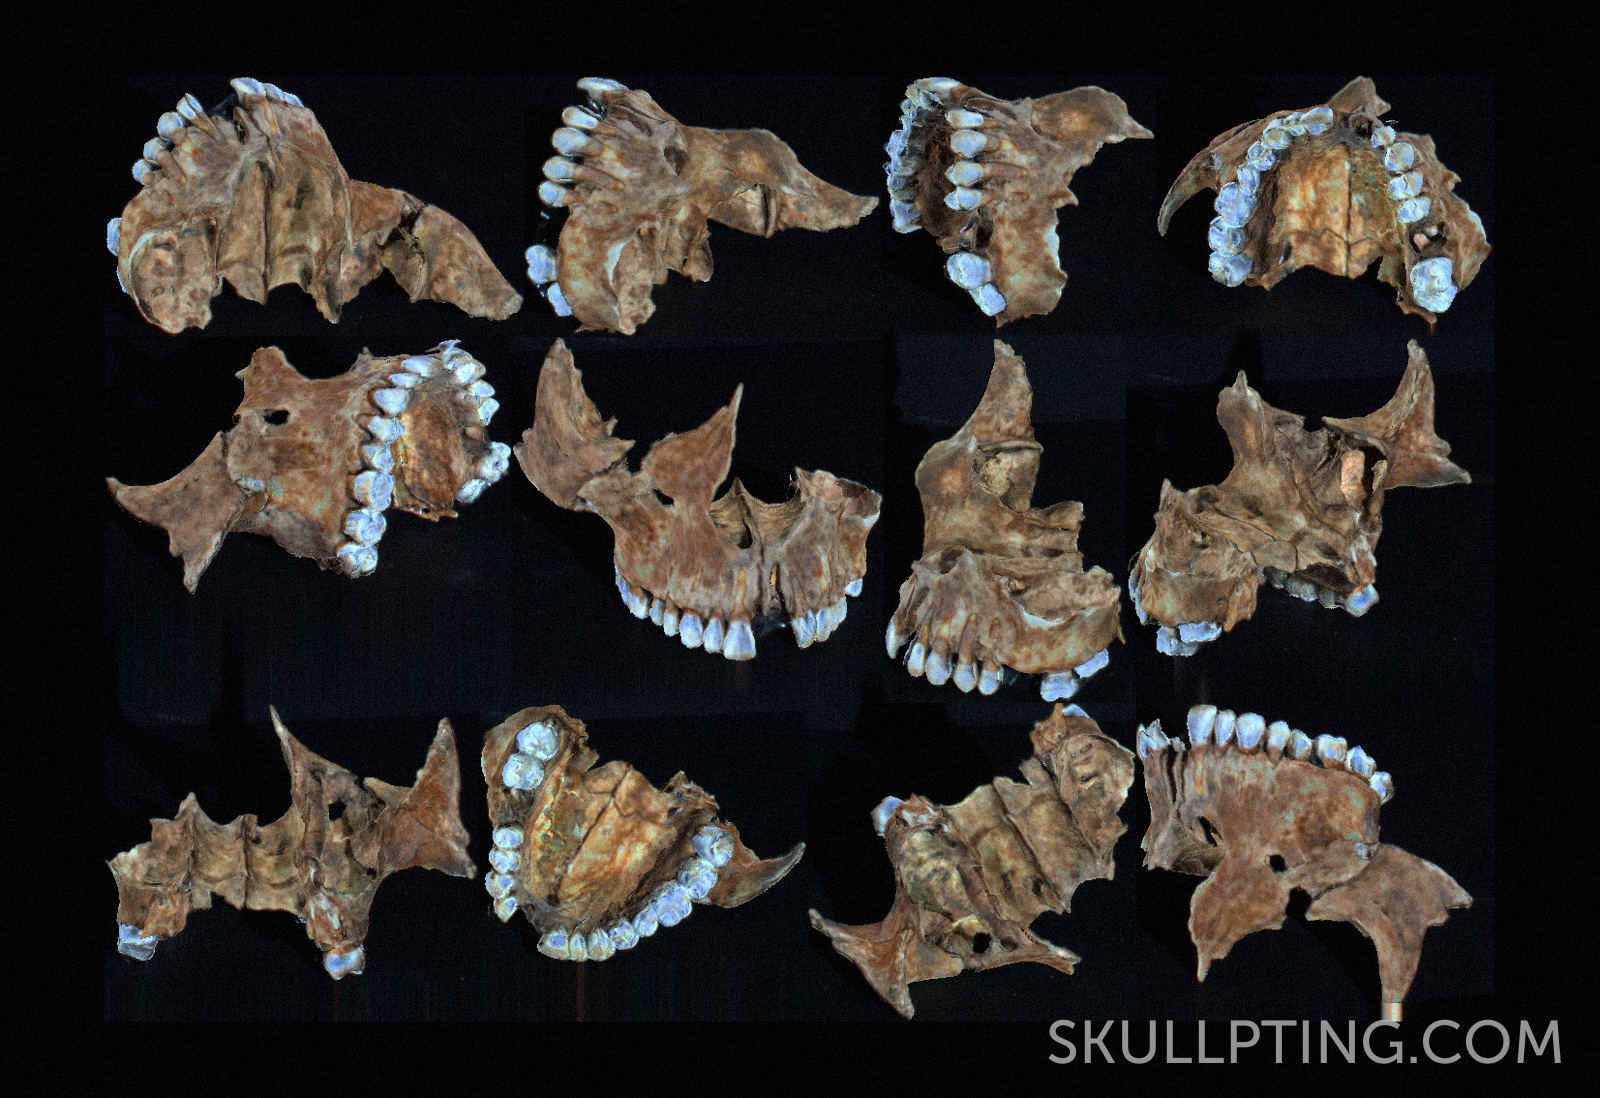 3D scan from the upper jaw. Made by M.H. Sepers, 4D - Research Lab.